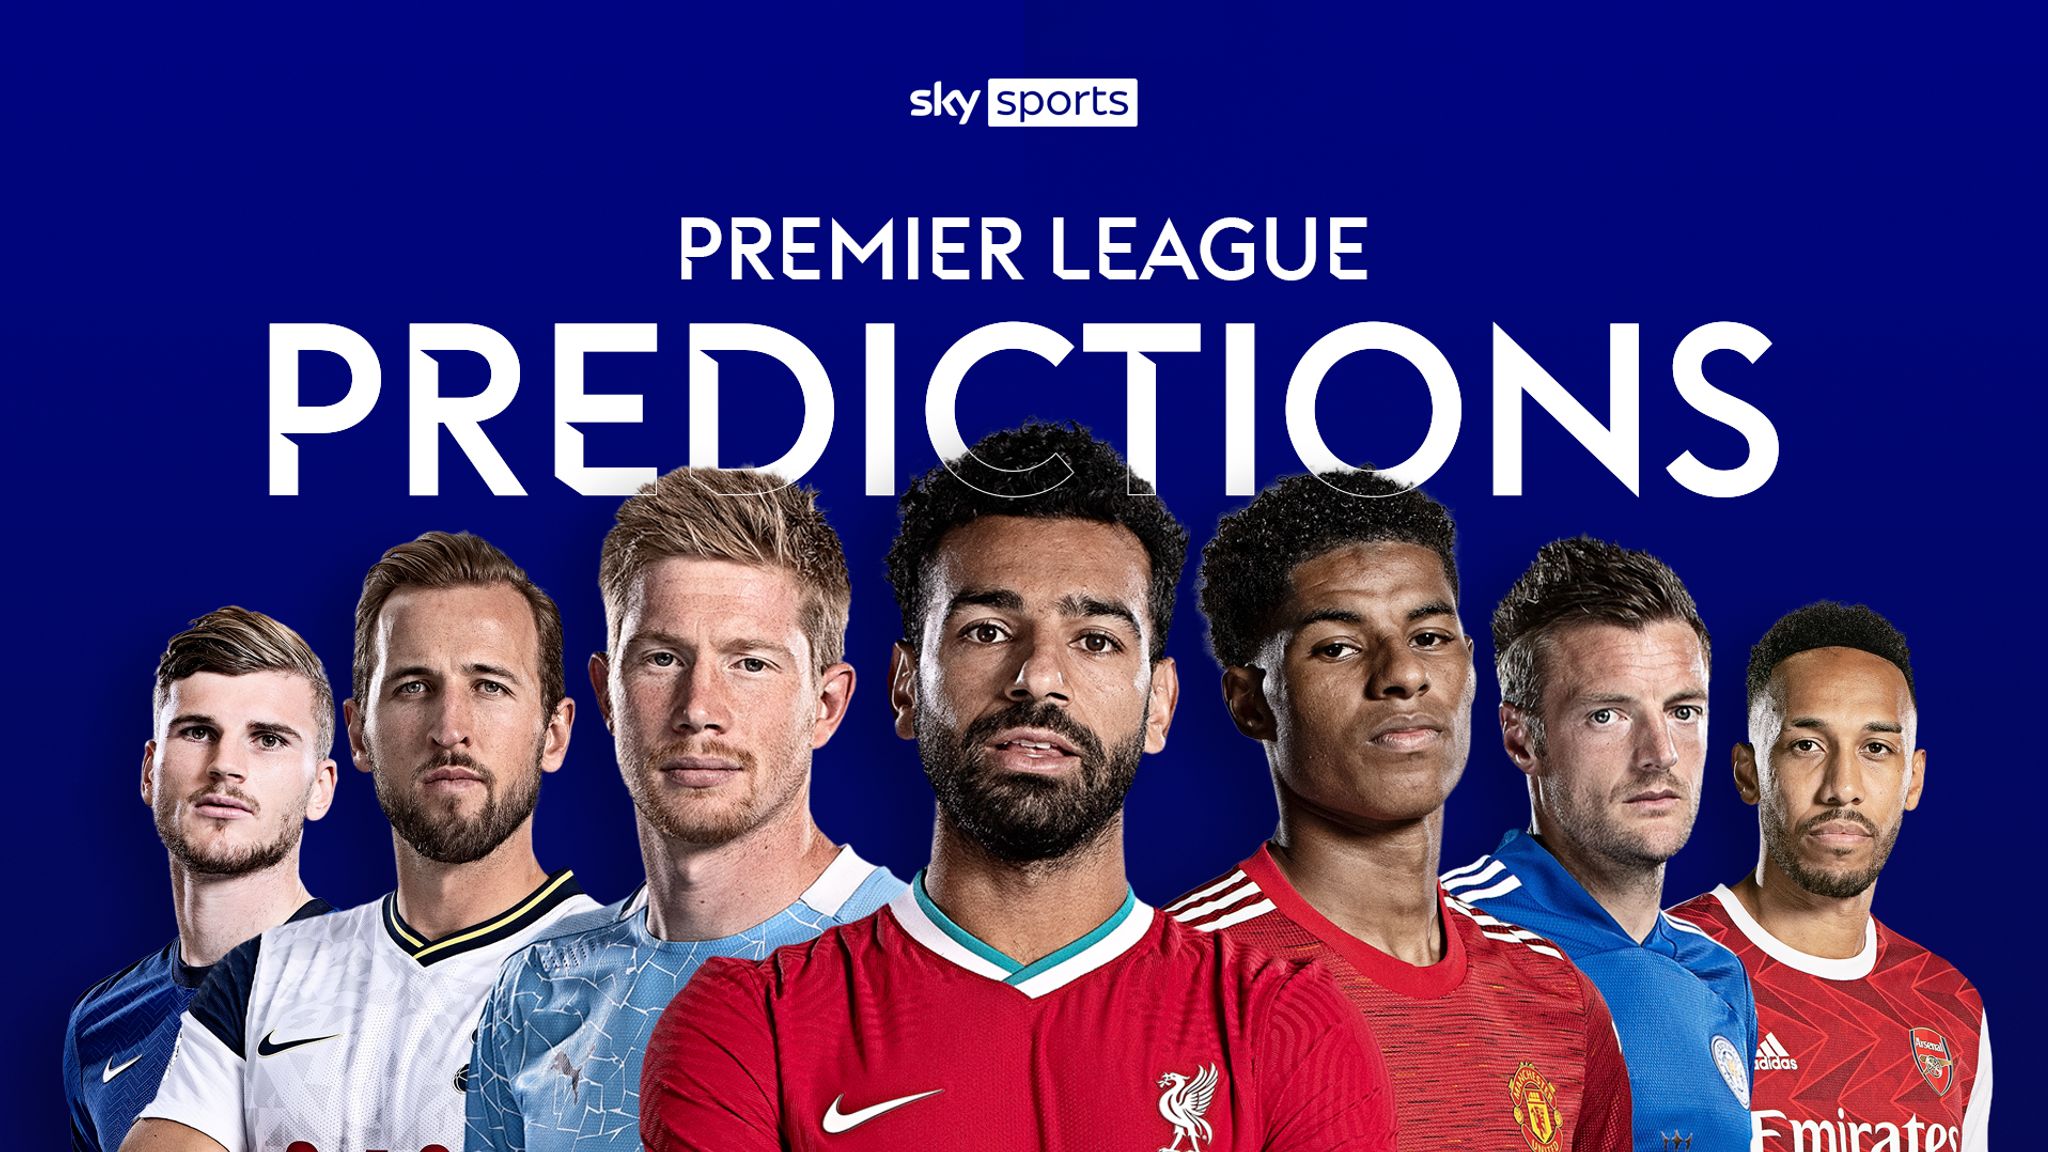 Premier League predictions Brighton can get a result and keep a clean sheet against Crystal Palace Football News Sky Sports